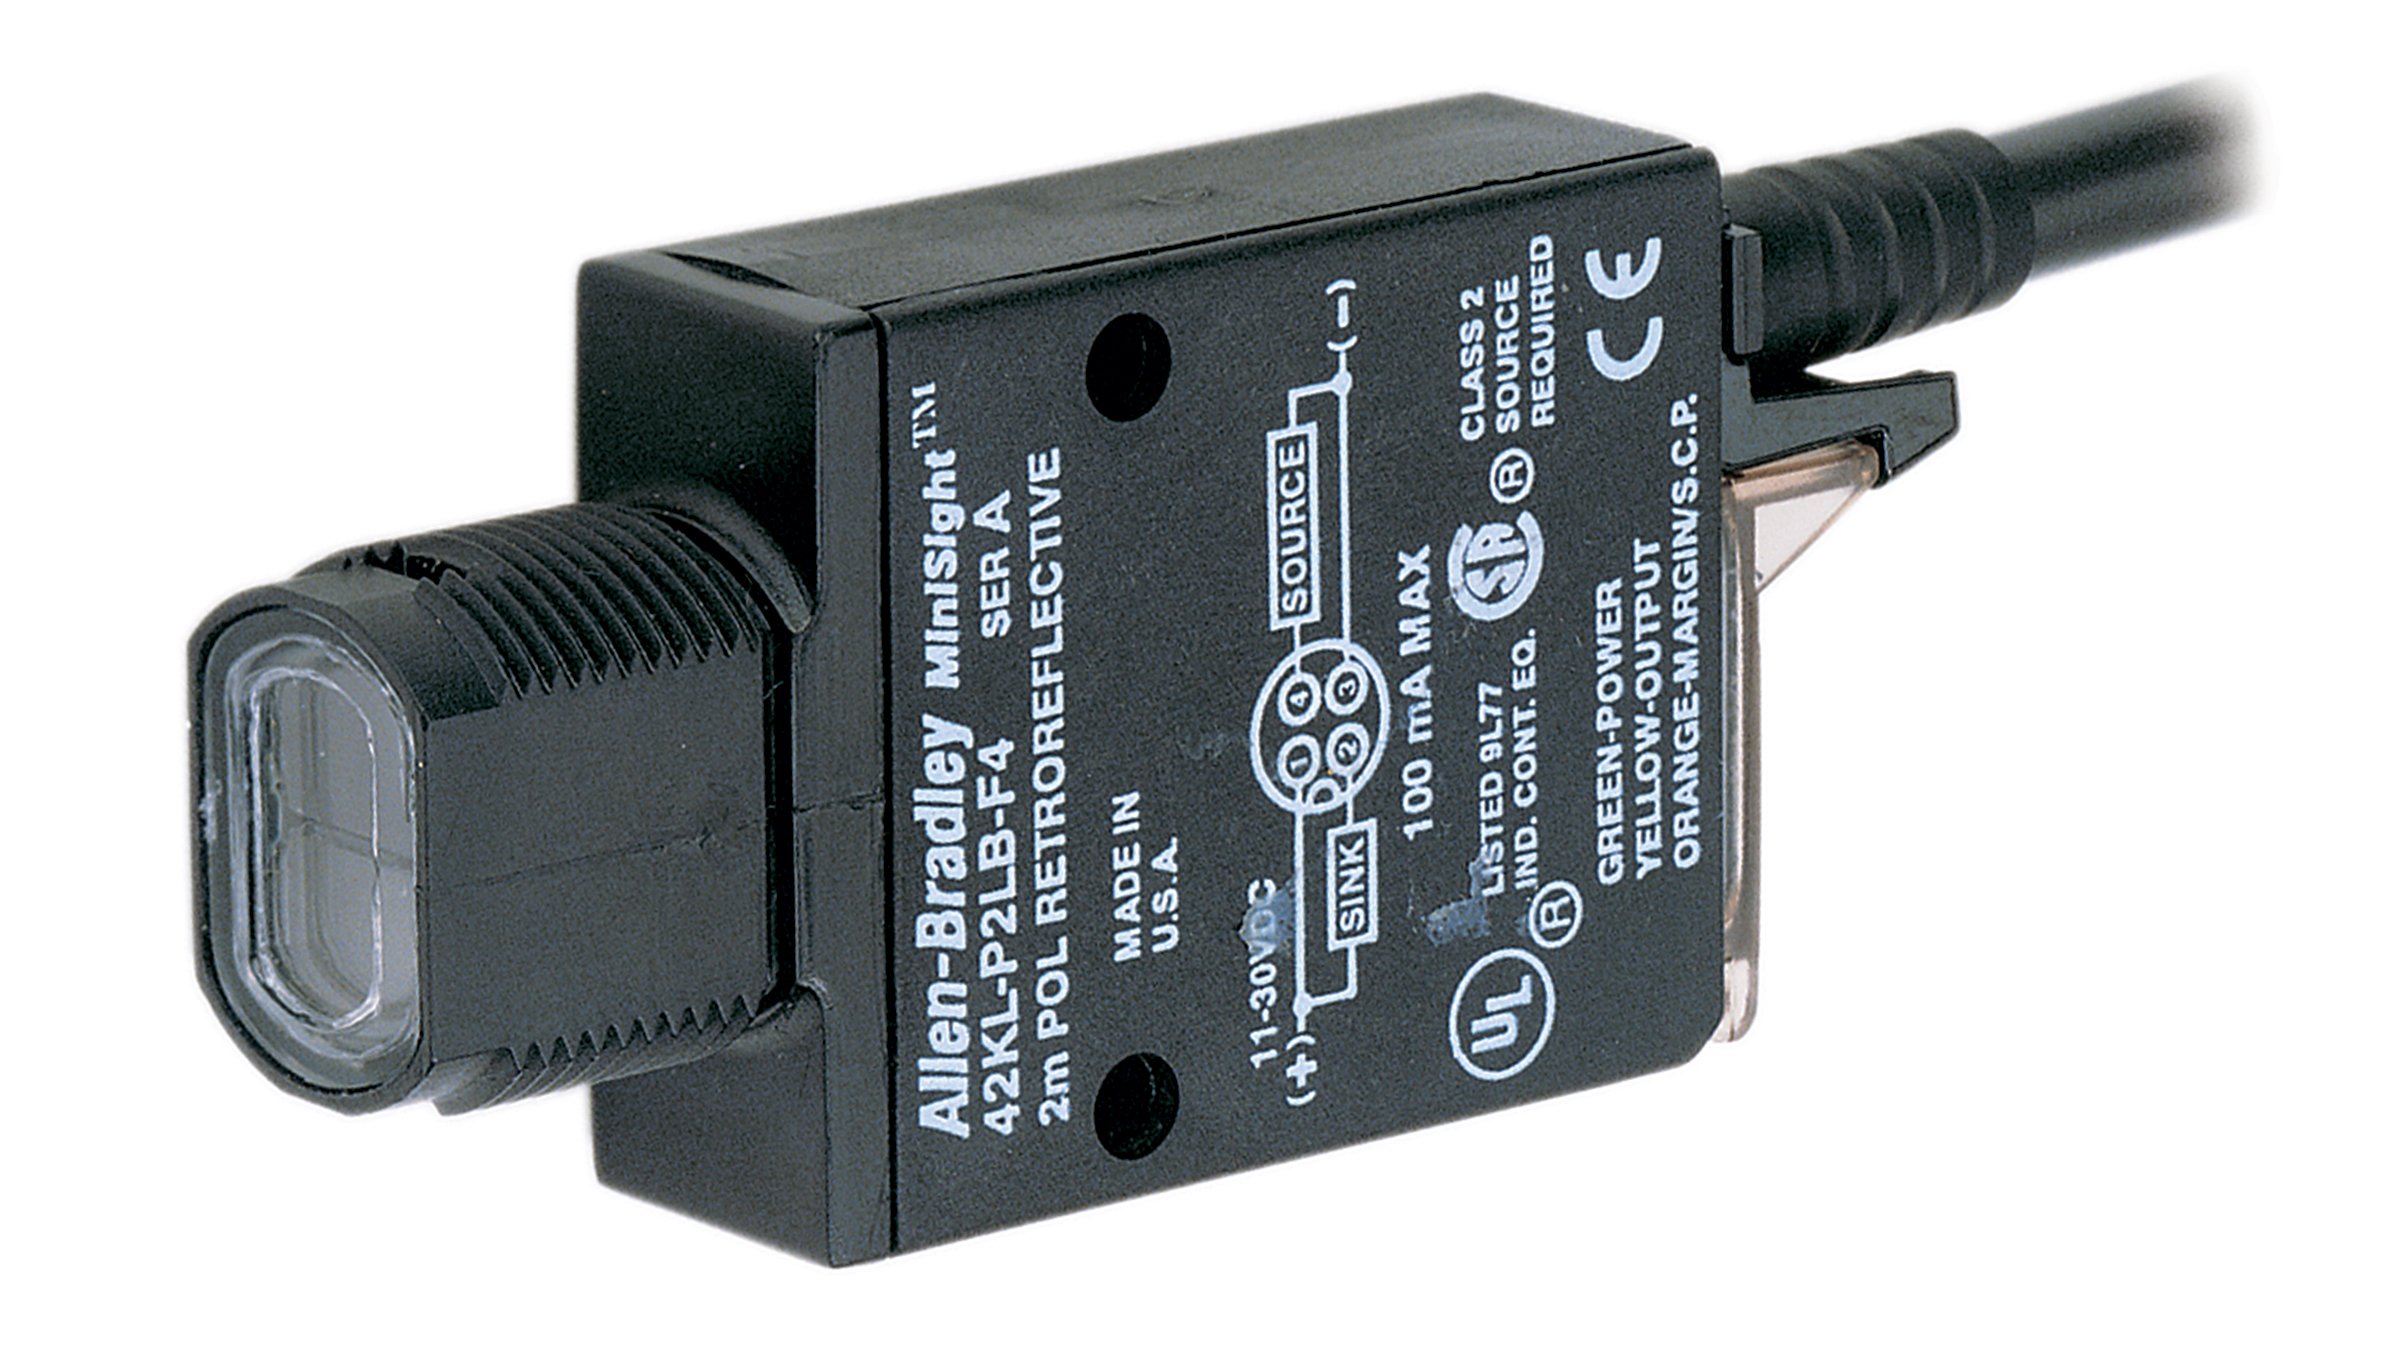 Black, rectangular sensor with an integrated cable on an end and sensor head on the other